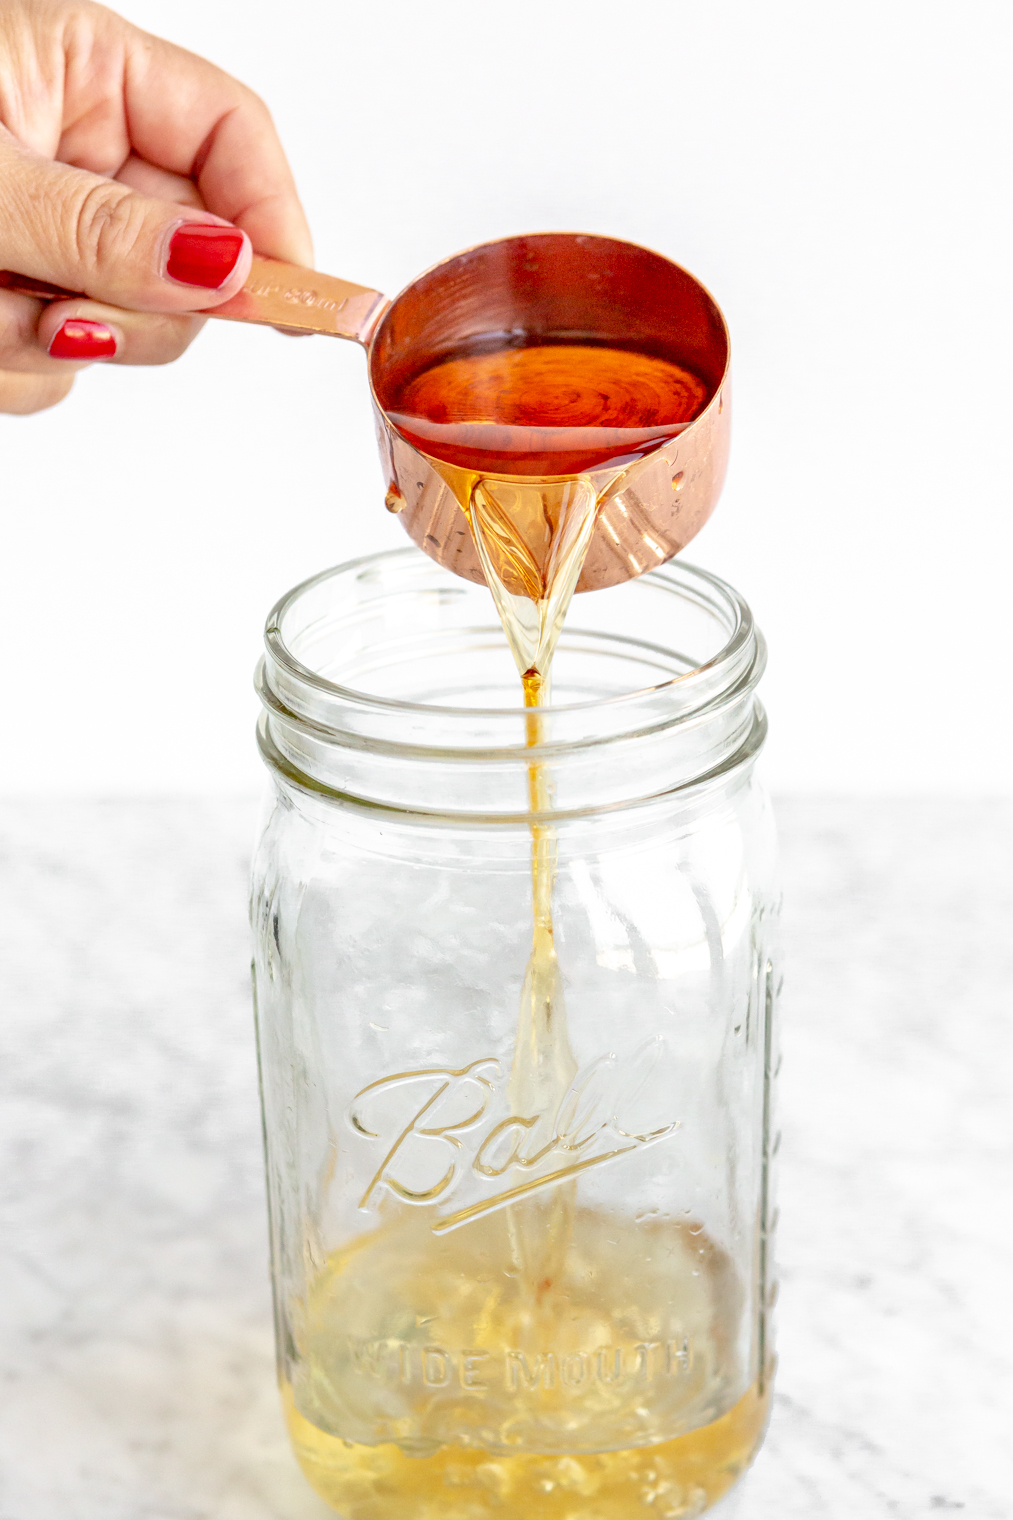 Grand Marnier being poured out of a copper measuring cup into a mason jar.